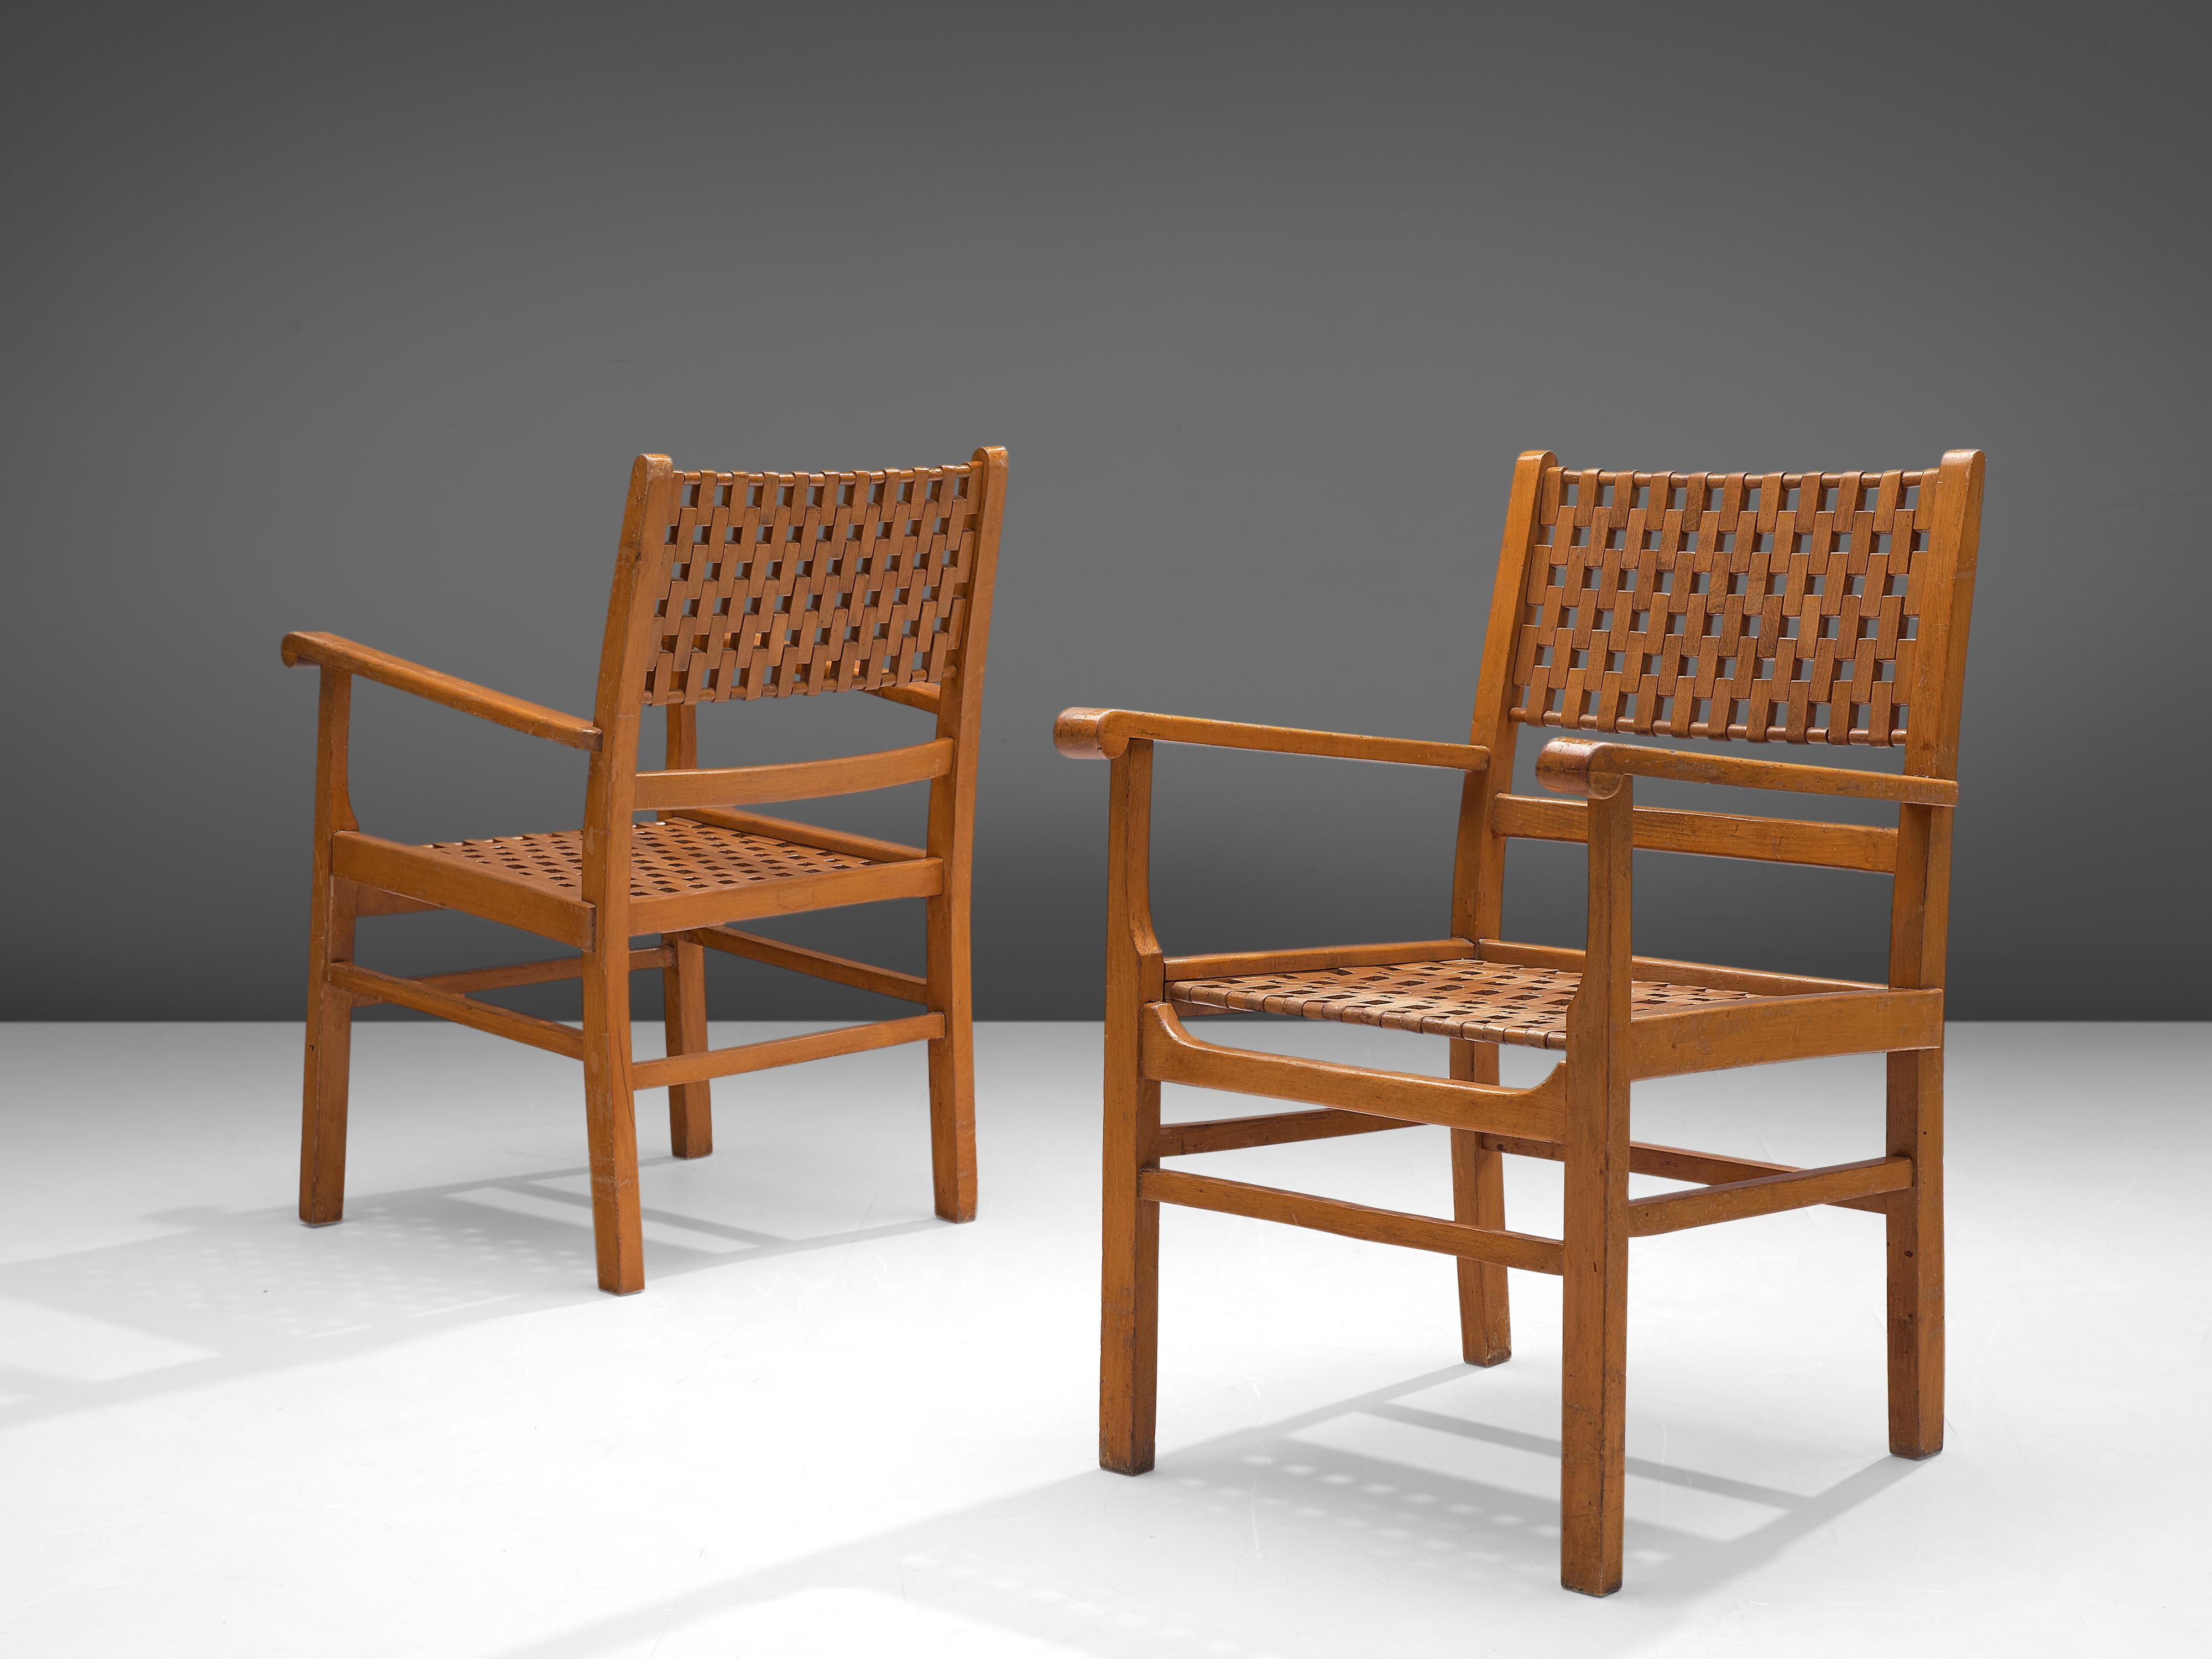 Two armchairs, beech, Europe, 1930s.

This set of chairs is executed in solid wooden seat with a wooden geometric back and seat. The style is typical for pre-war design. Playful, bold lines and experimental techniques are seen in this remarkable